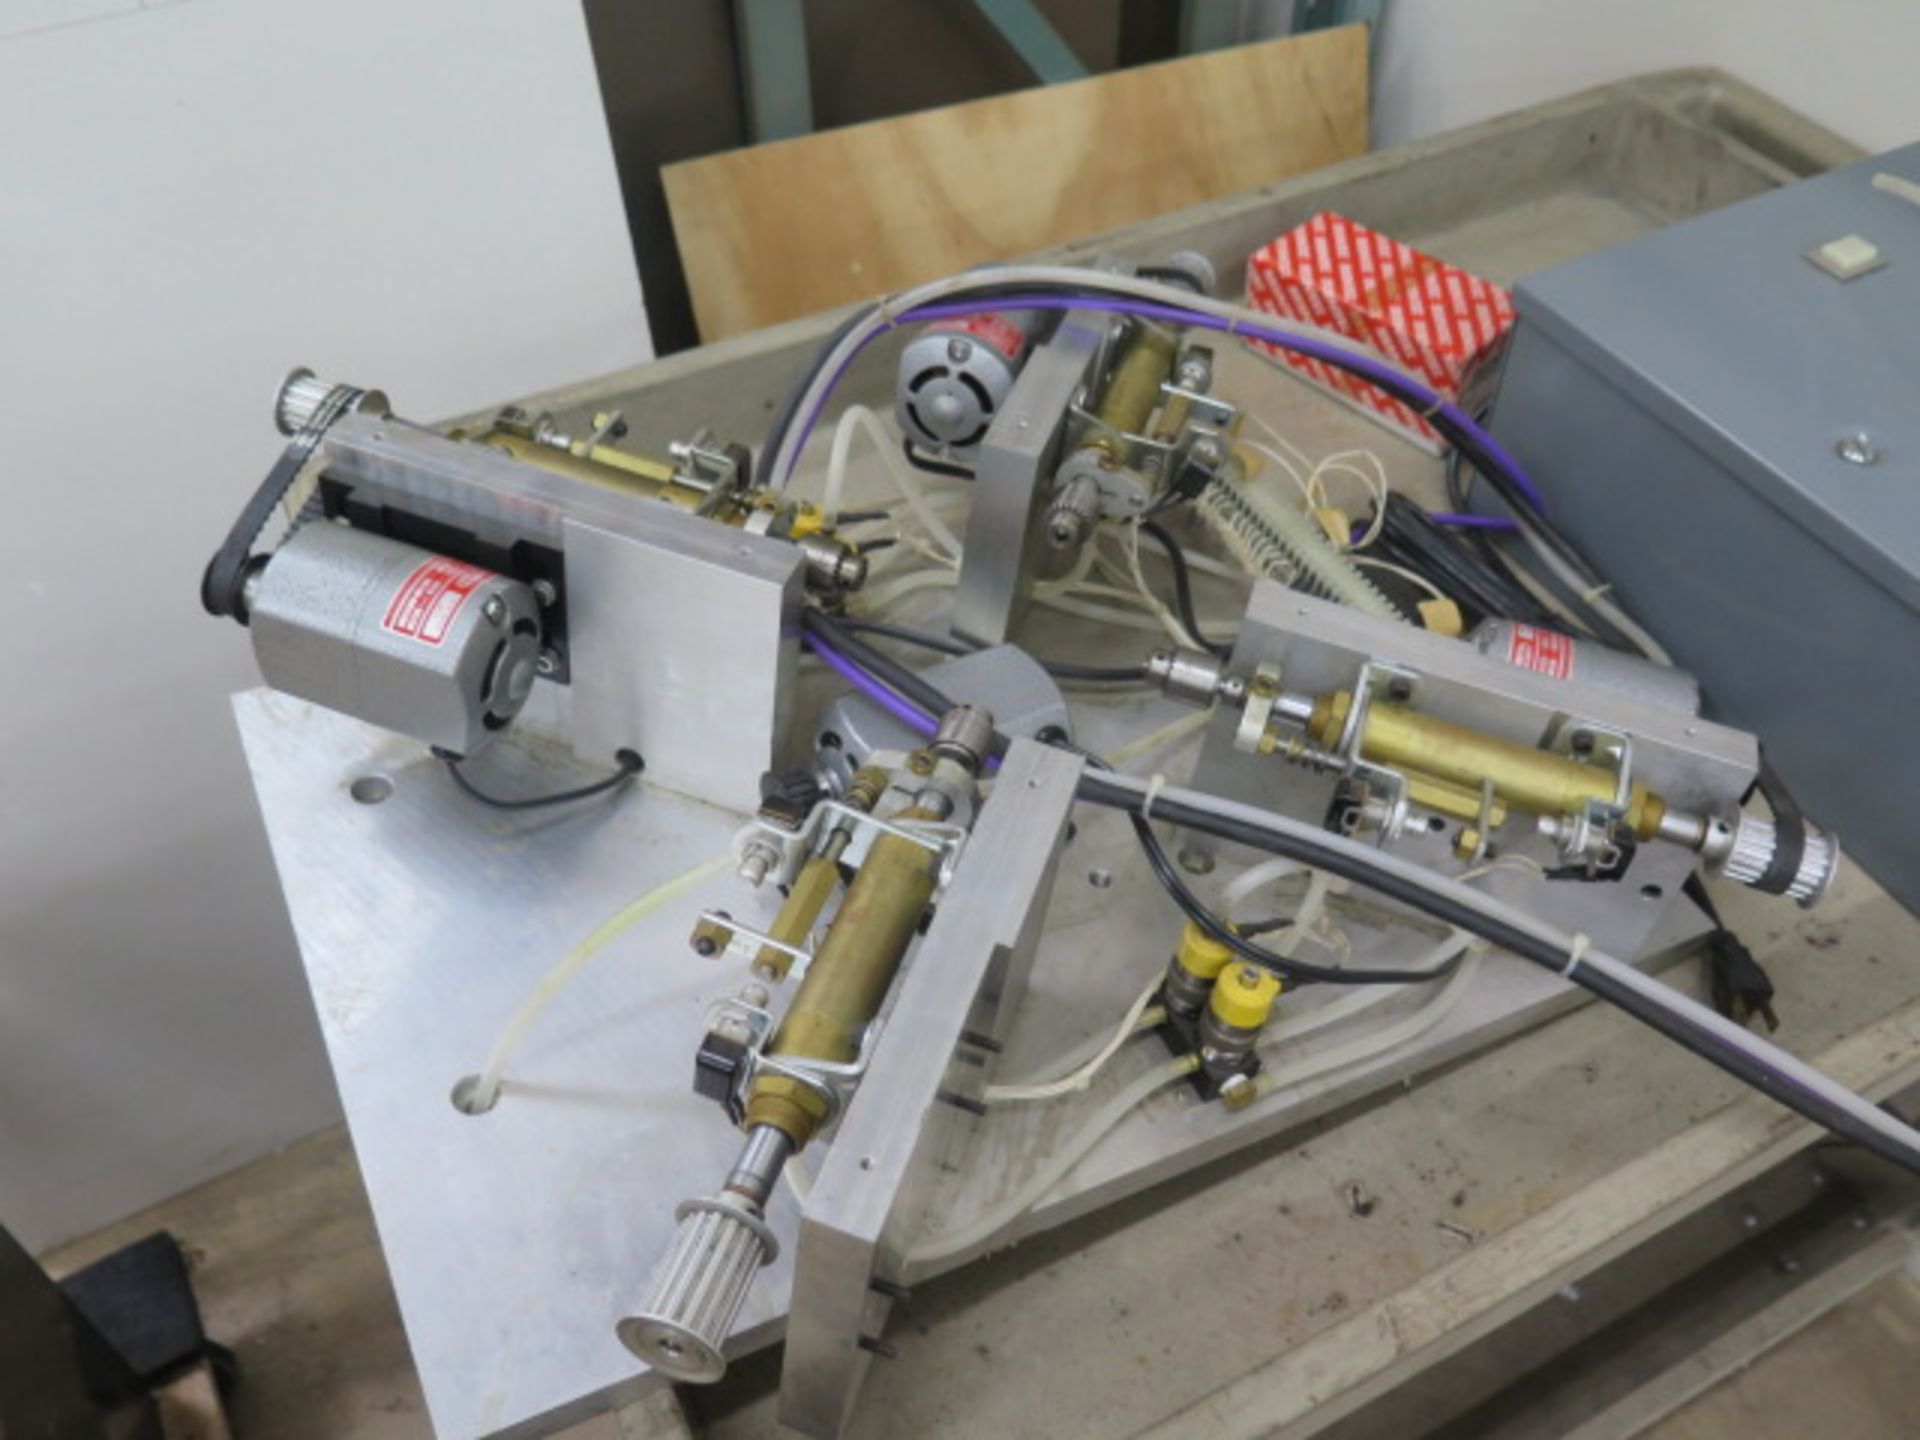 Custom 4-Head Automated Cross-Drilling Machine w/ Controller (SOLD AS-IS - NO WARRANTY) - Image 3 of 8